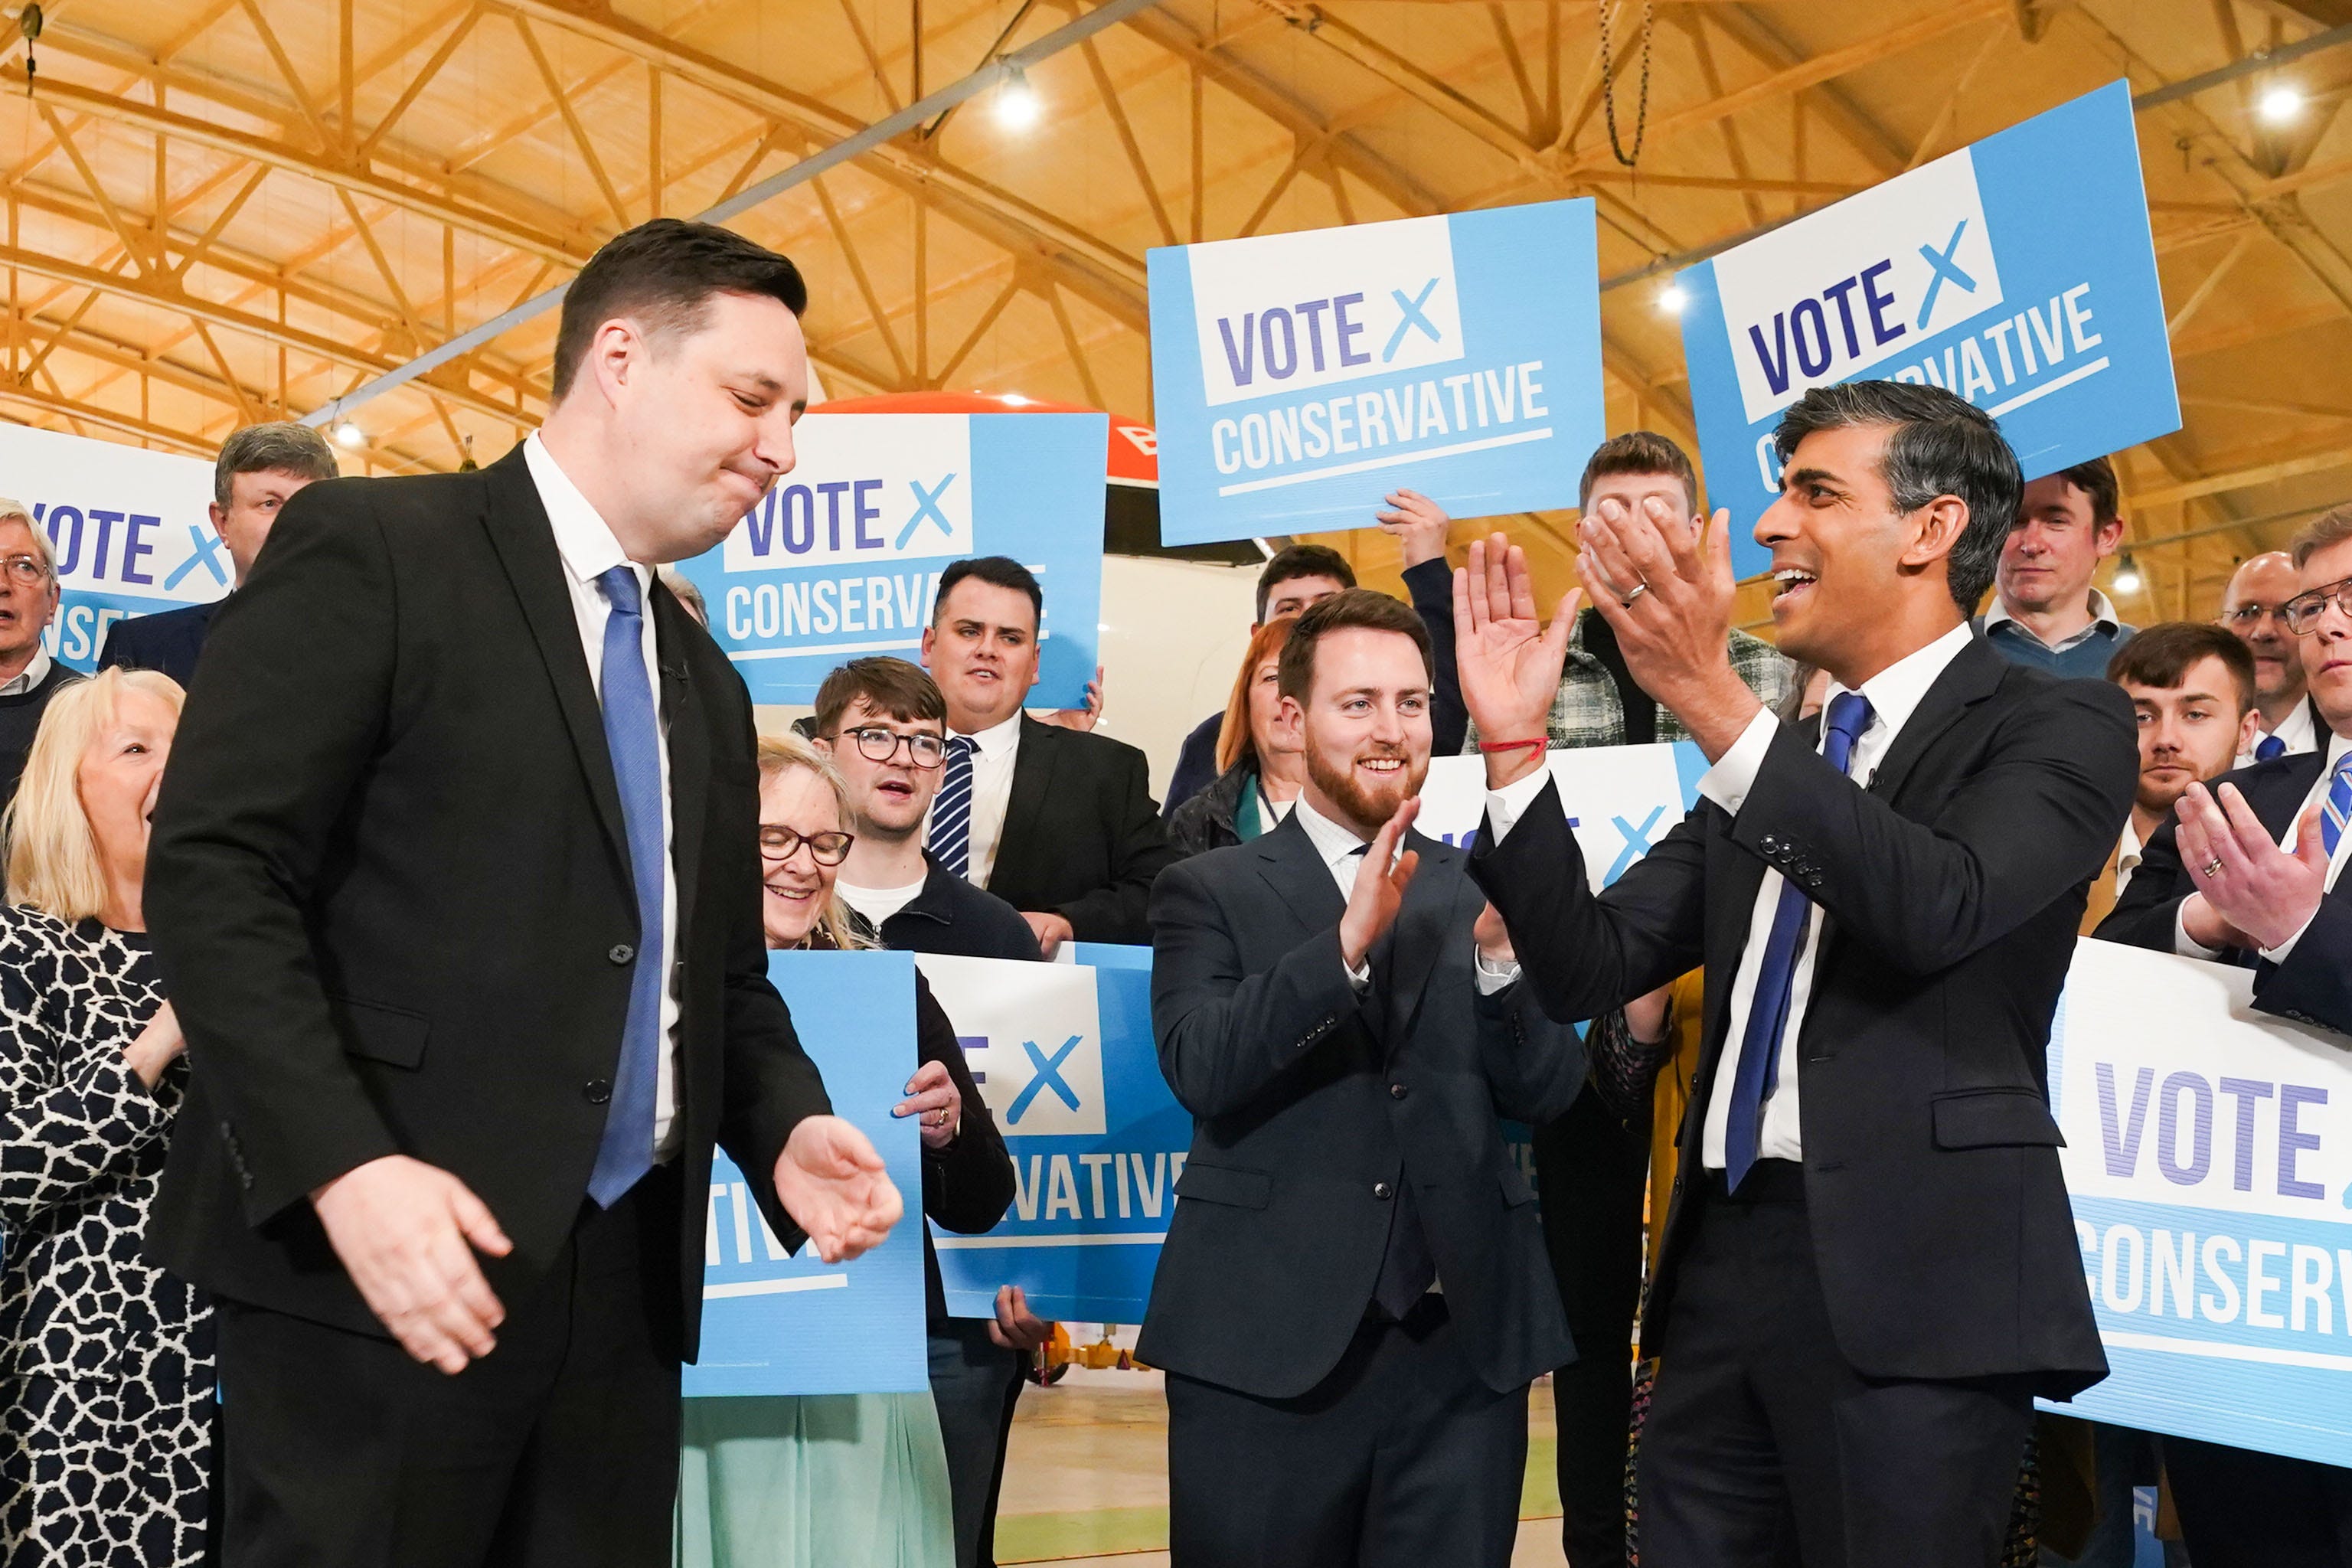 Lord Ben Houchen with Prime Minister Rishi Sunak in Teesside following his re-election as Tees Valley Mayor (Owen Humphreys/PA)